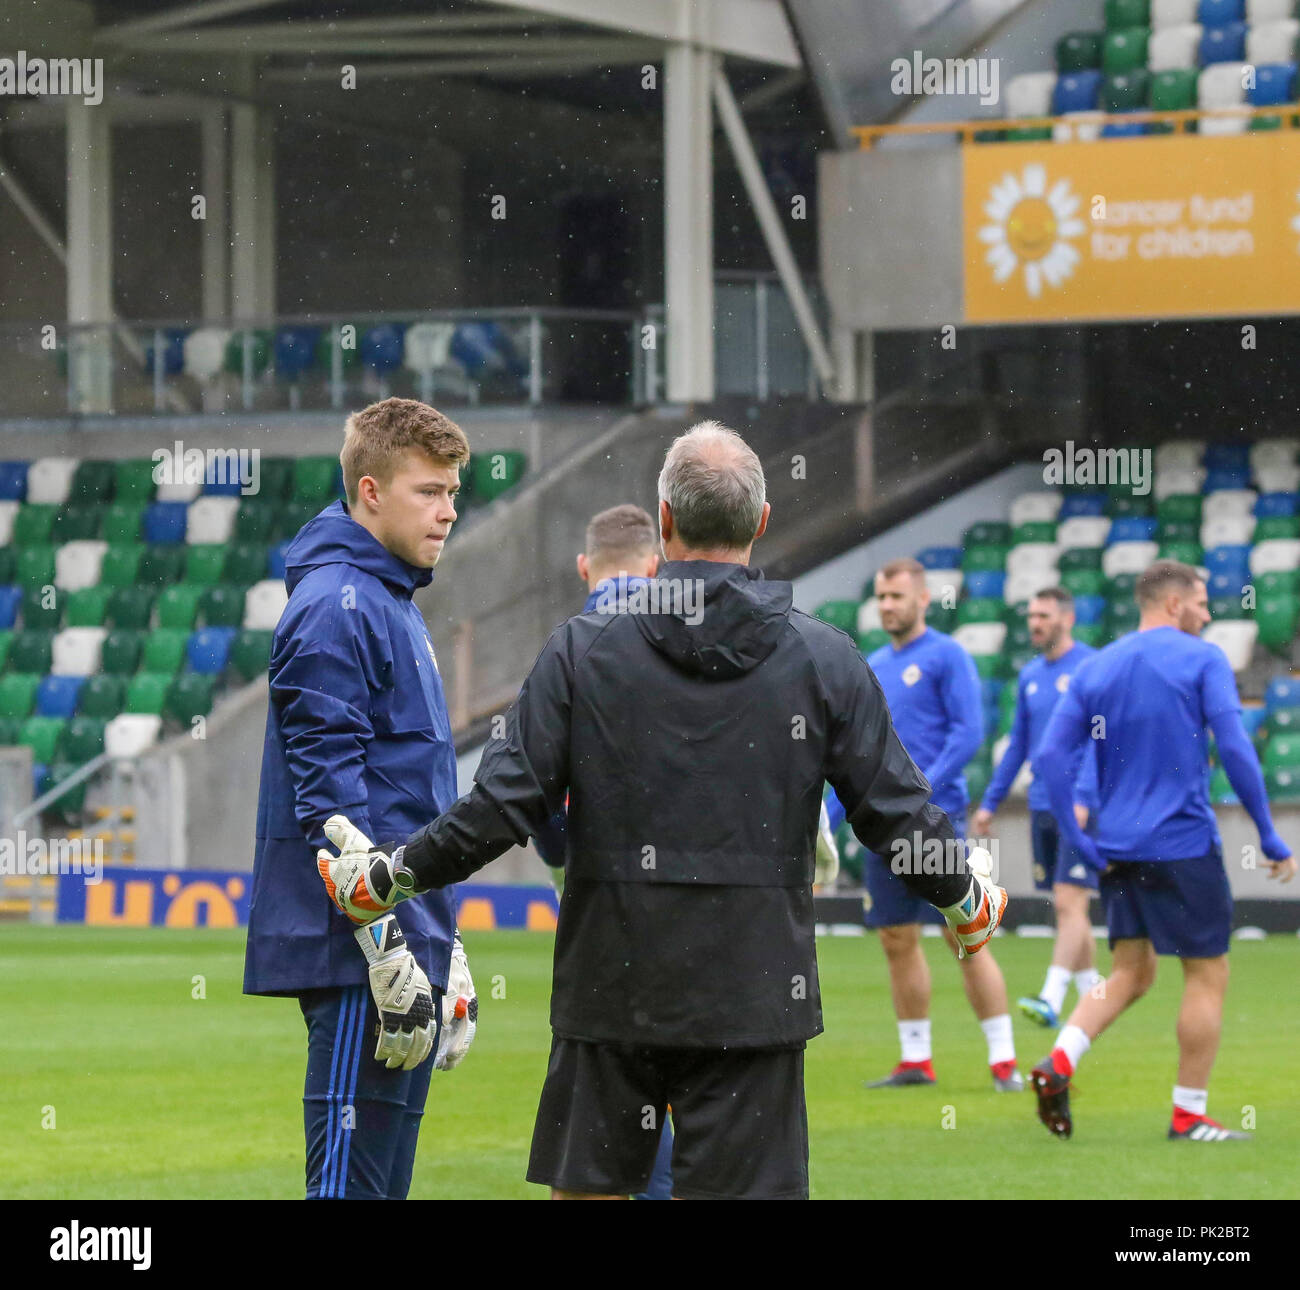 Windsor Park, Belfast, Northern Ireland. 10 September 2018. After Saturday's defeat in the UEFA Nations League, Northern Ireland returned to training this morning at Windsor Park. Tomorrow night they play Israel in a friendly international. Goalkeeper Bailey Peacock-Farrell (l) talks to goal-keeping coach Maik Taylor. Credit: David Hunter/Alamy Live News. Stock Photo